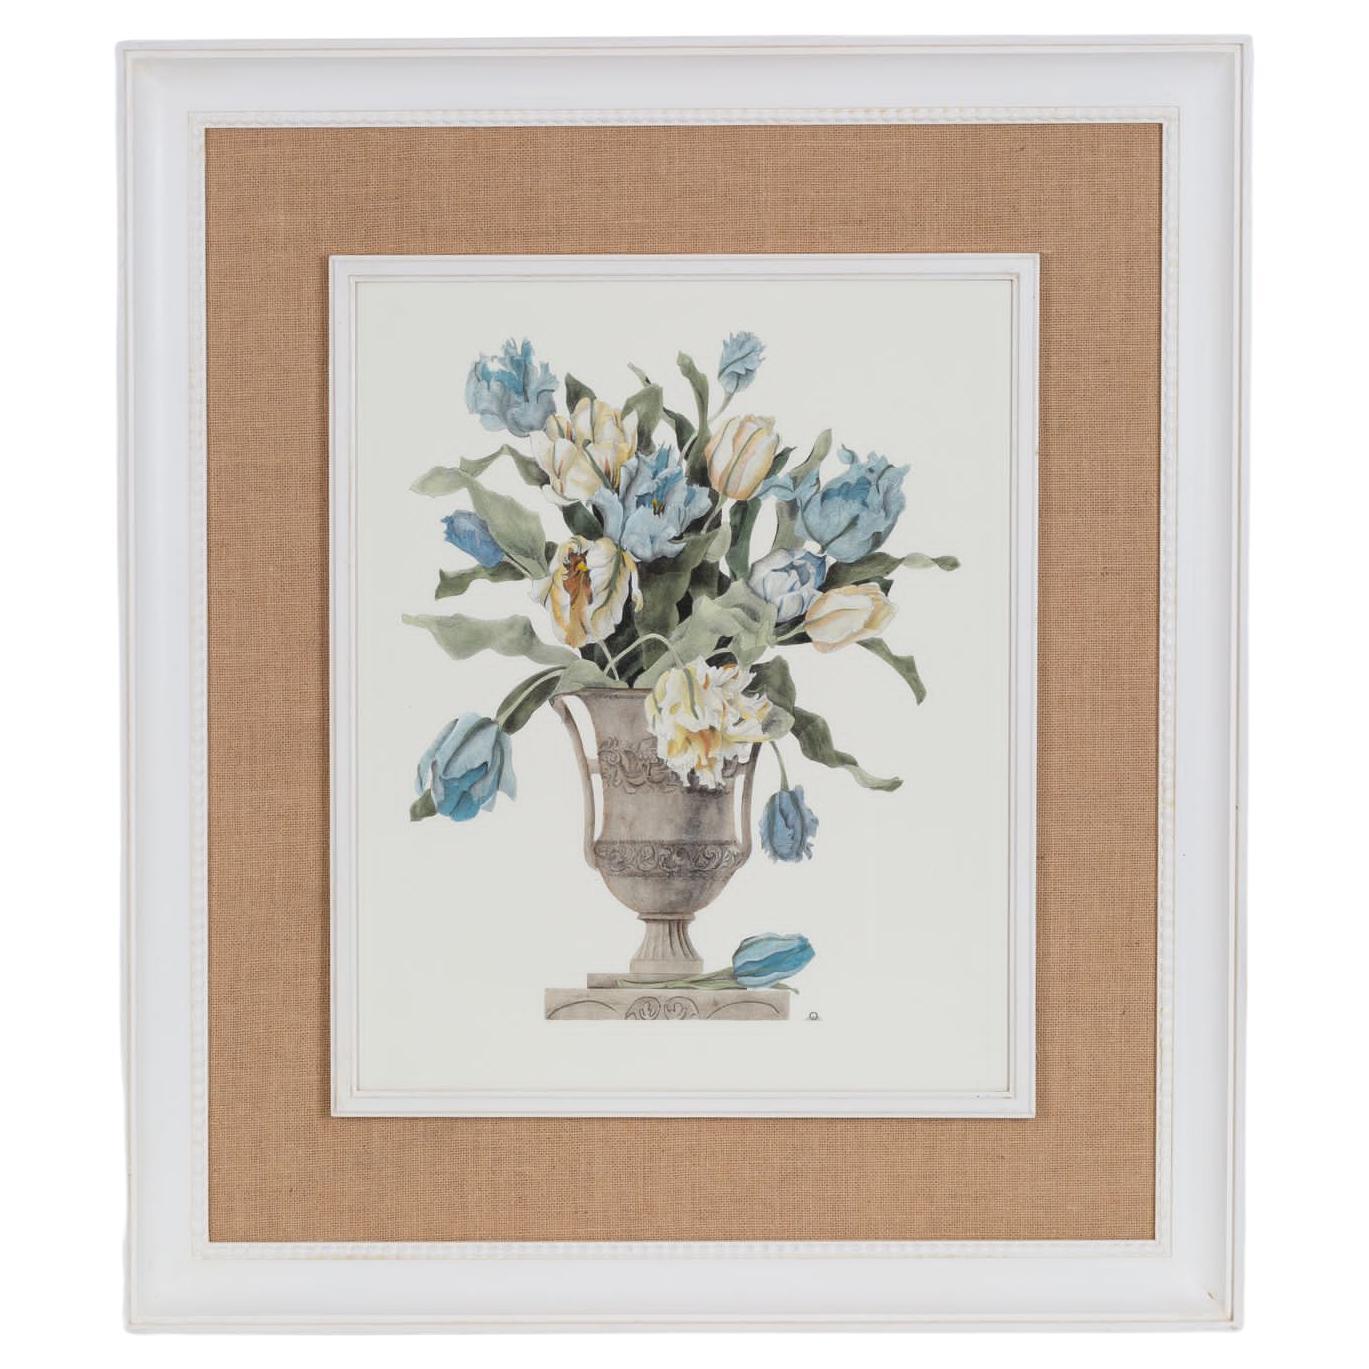 Print from the Collection Botanique representing Crinum Erubescens, with a beautiful wooden frame enriched with a jute passpartout, which brings out colors and nuances of watercolor colors.

Another different Crinum prints are available to create a